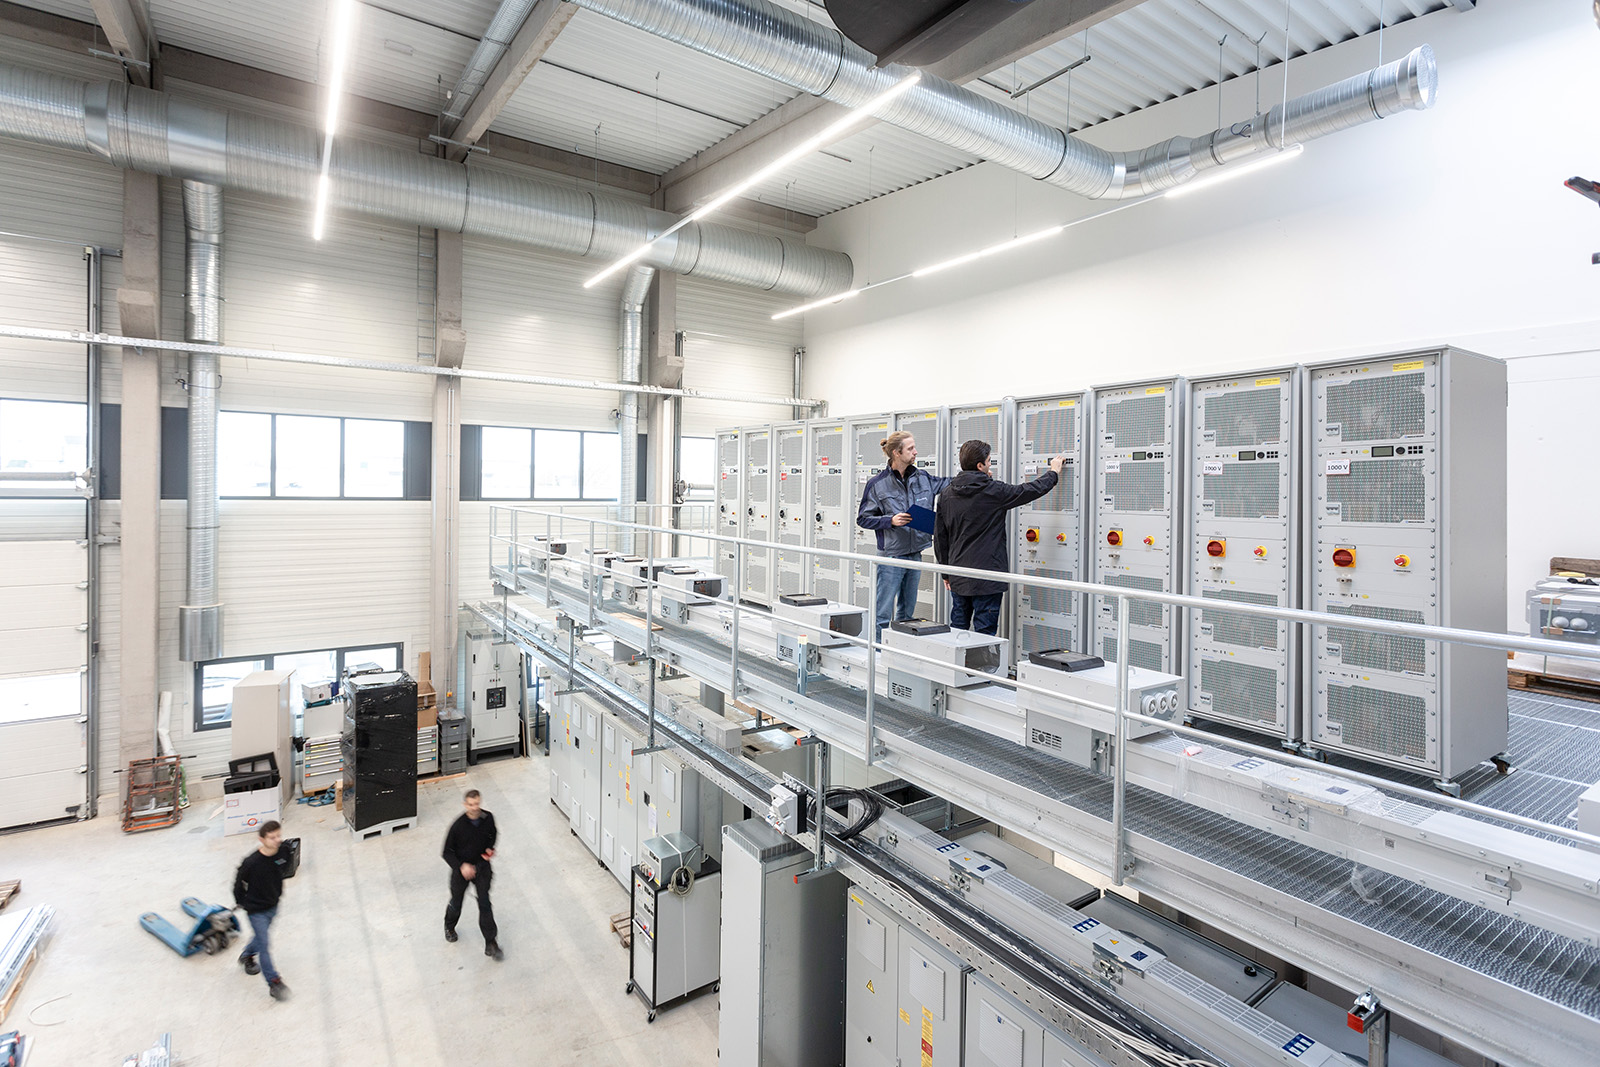 The Multi-Megawatt Lab at Fraunhofer ISE in Freiburg makes it possible to achieve highly precise characterization of the electrical proper-ties of converters up to a power of 10 MW.